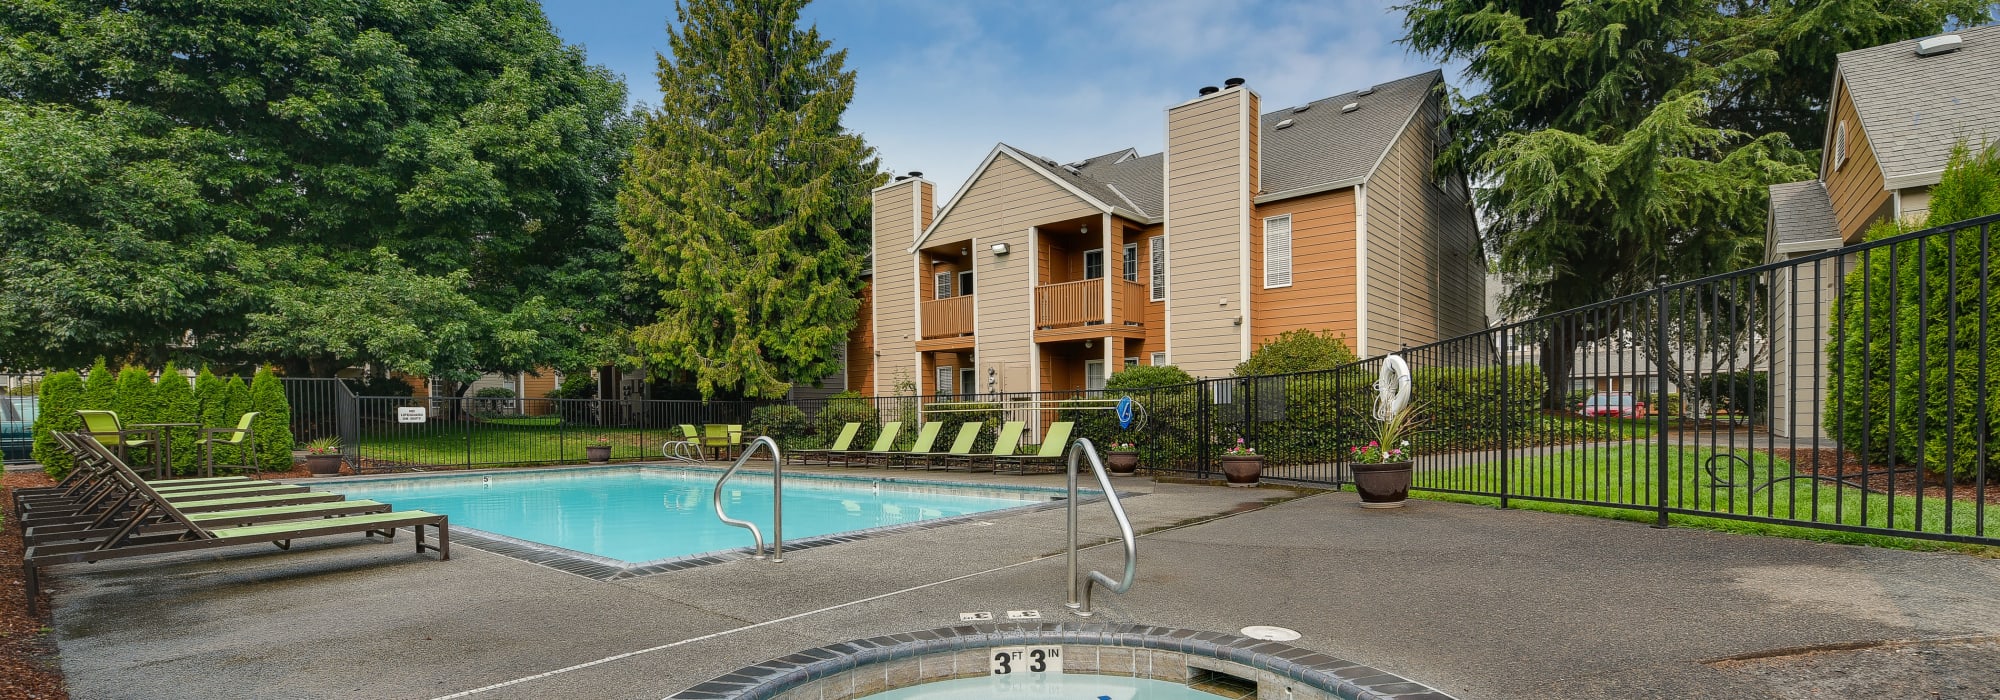 Map and directions to Carriage House Apartments in Vancouver, Washington